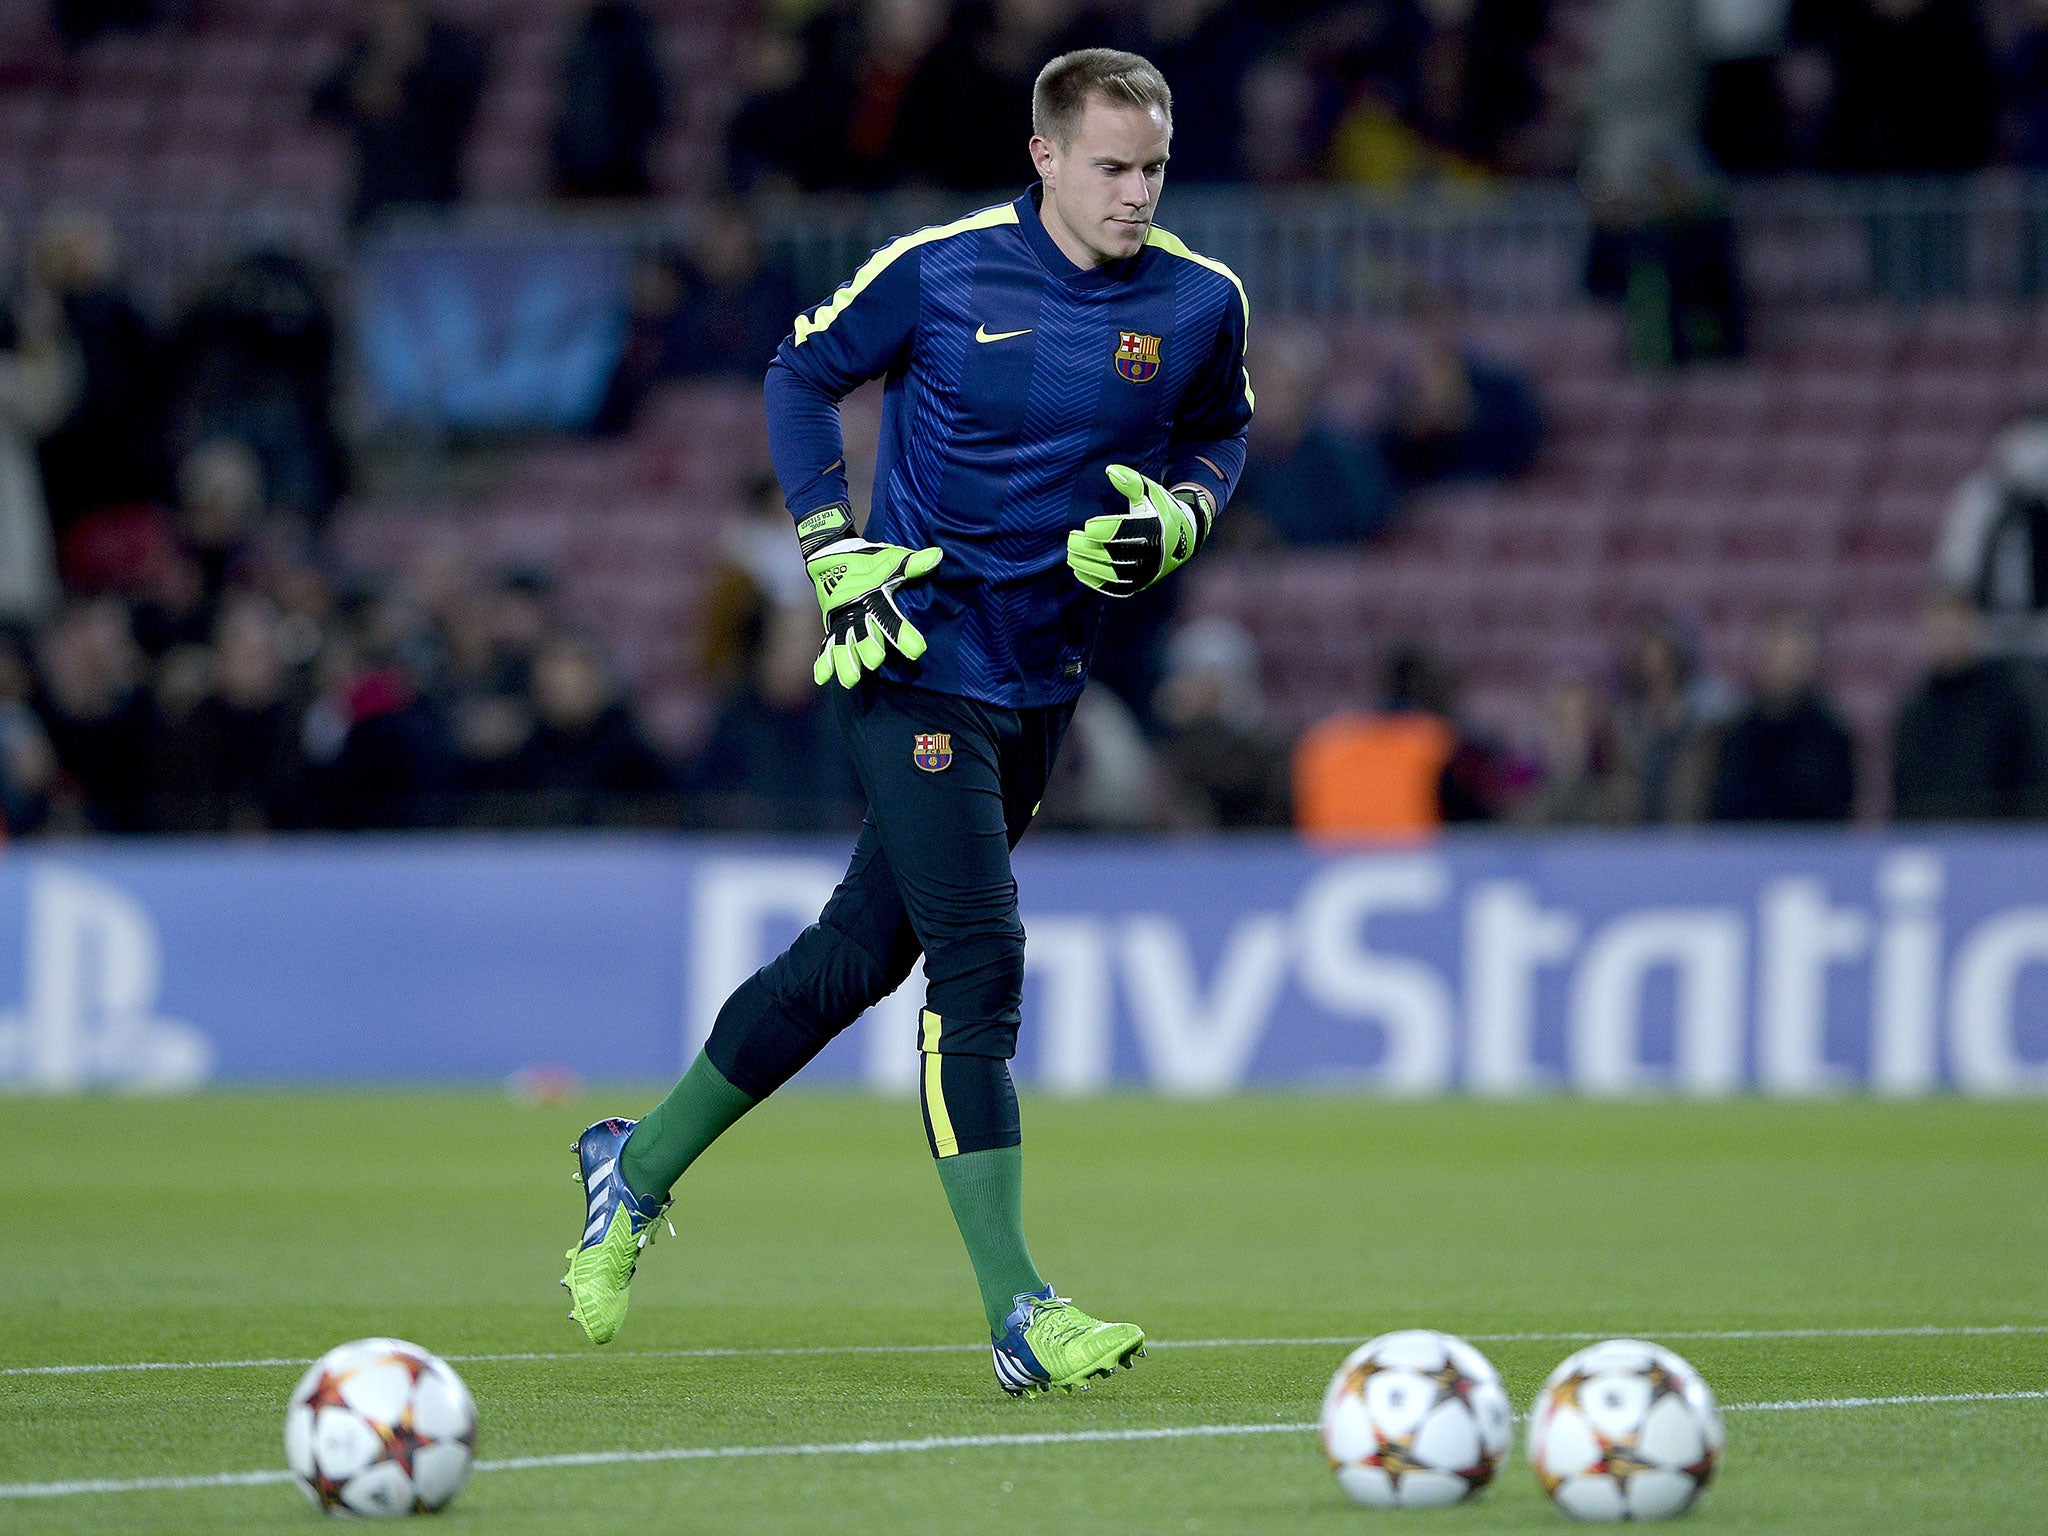 Marc-Andre ter Stegen could be in line for a loan to Liverpool